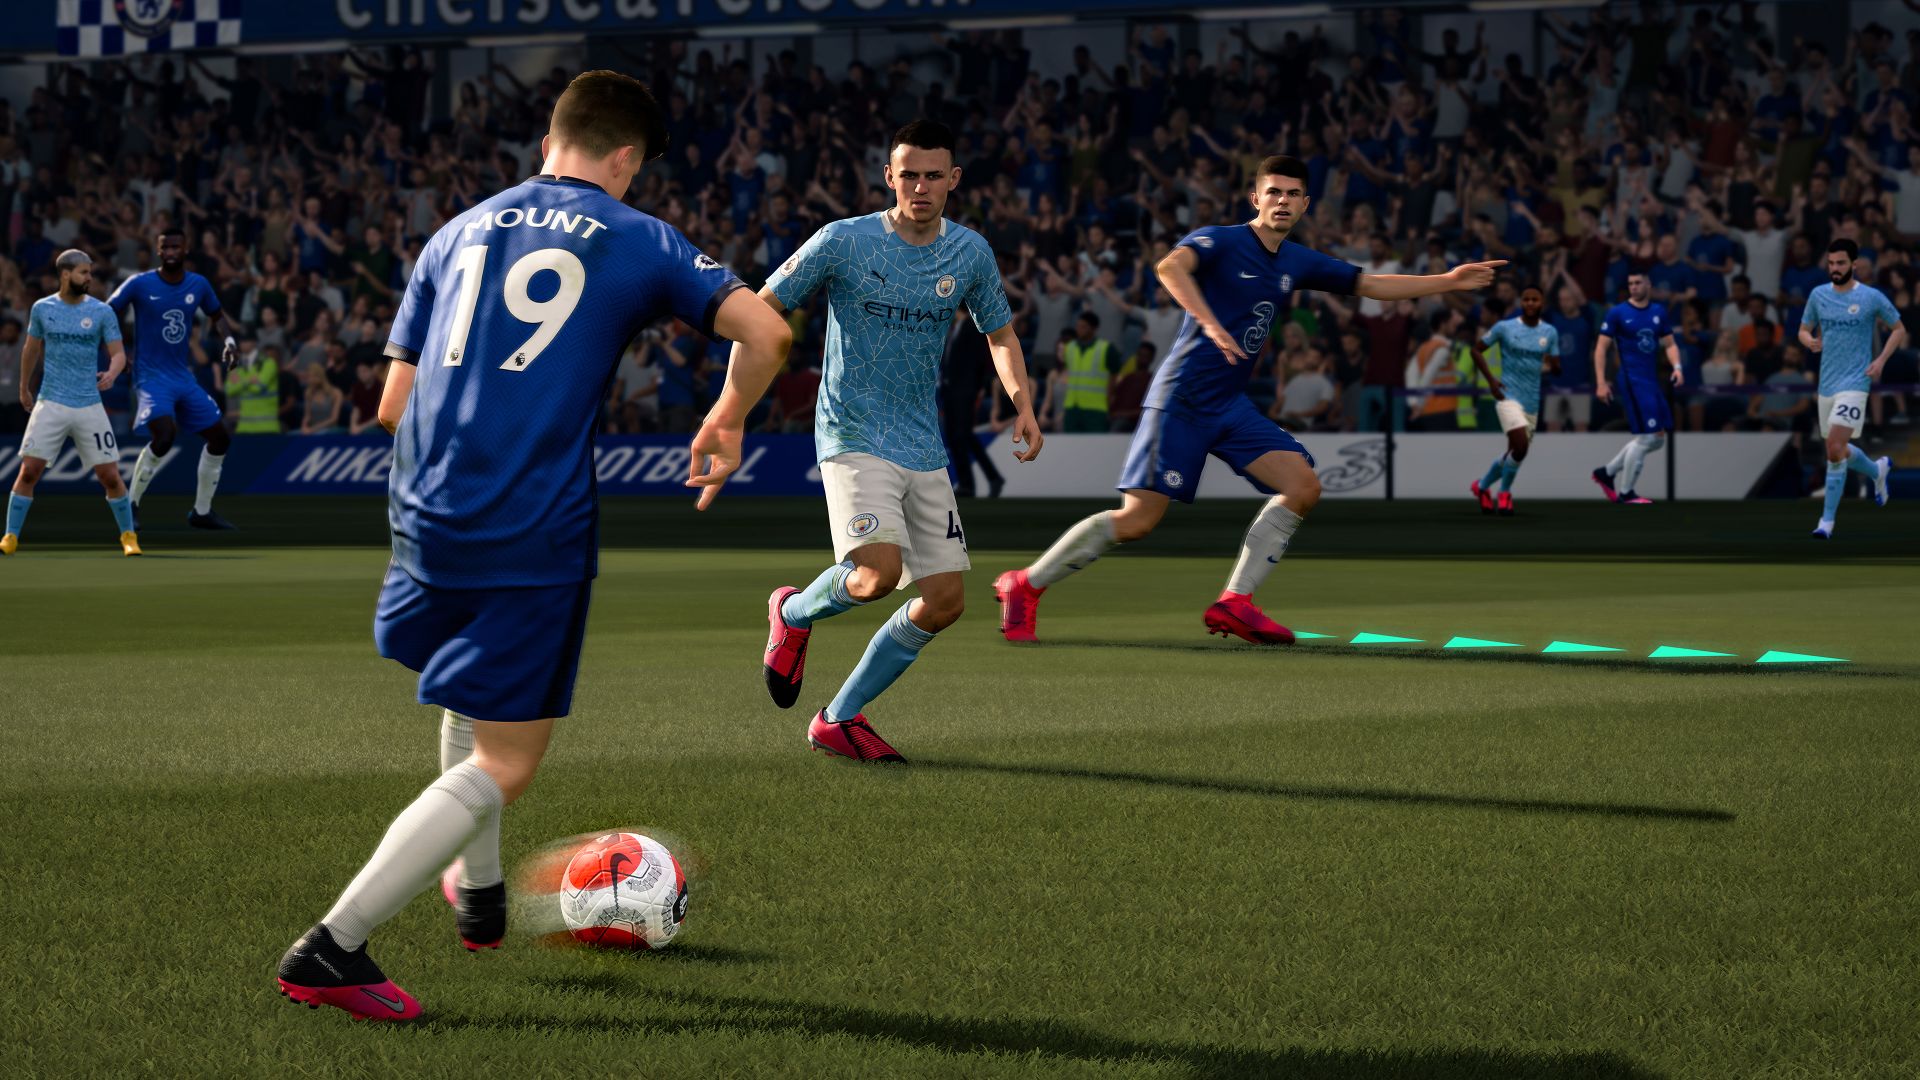 EA Sports FIFA 21 is available now on Xbox One